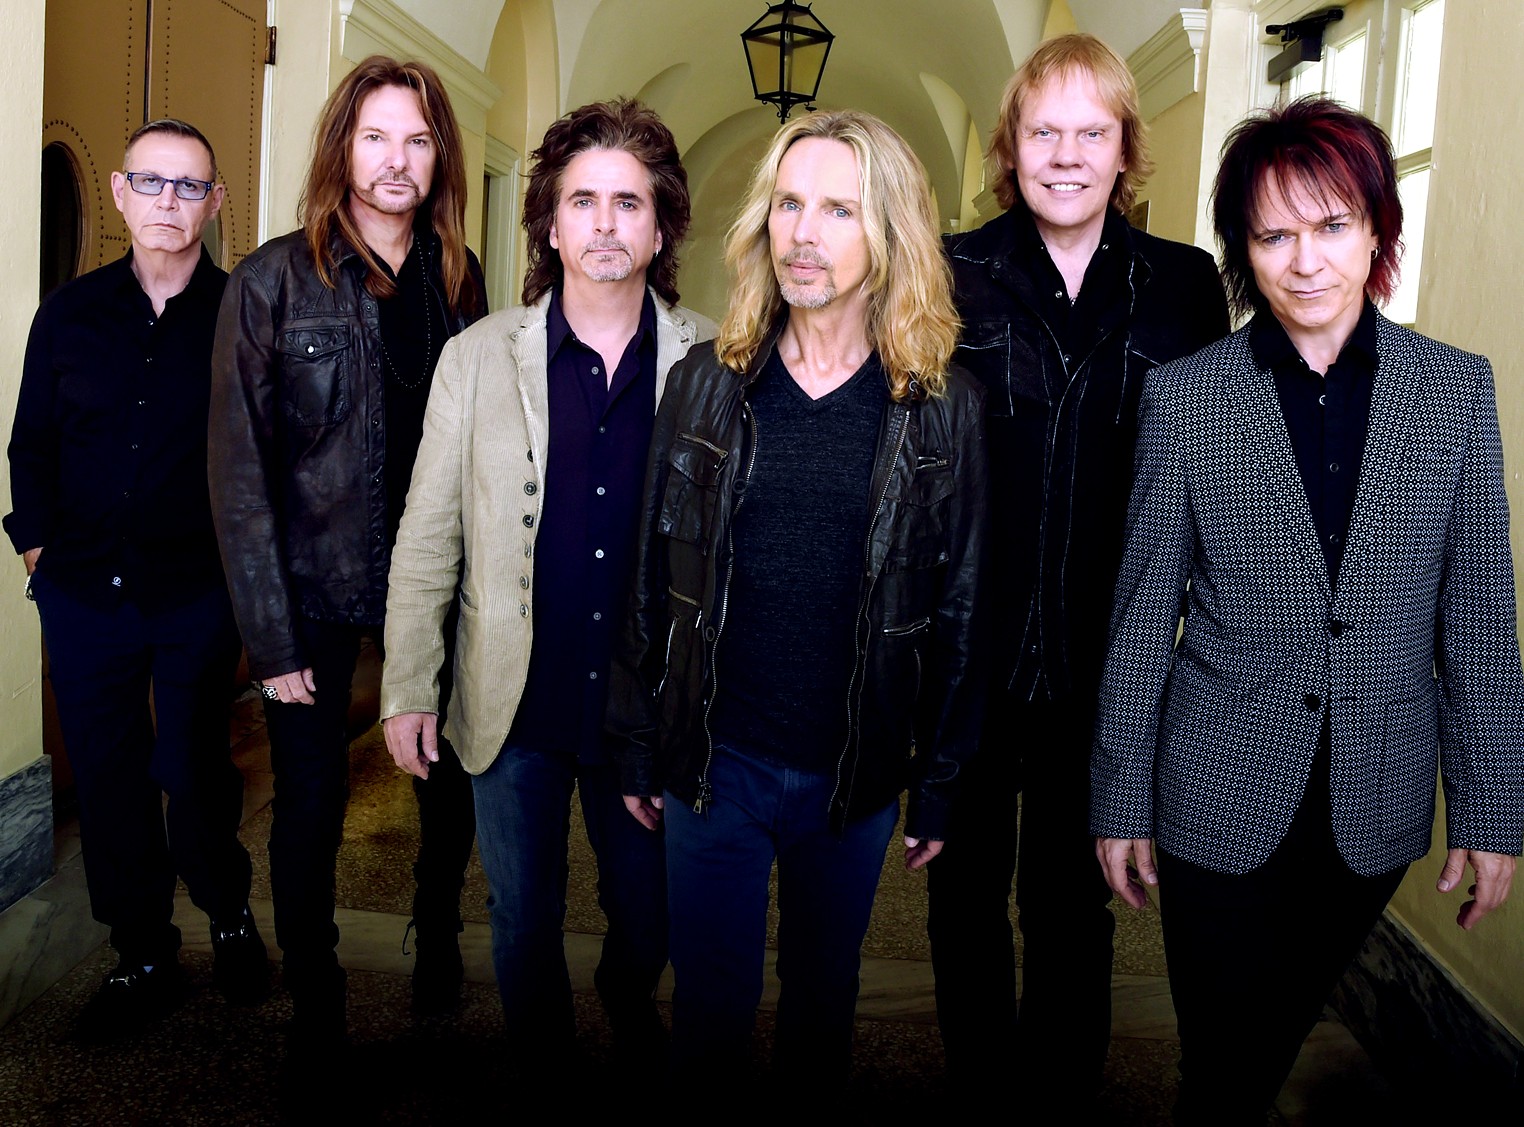 Styx Returns to DFW With (Another!) New Album and a New Guitarist